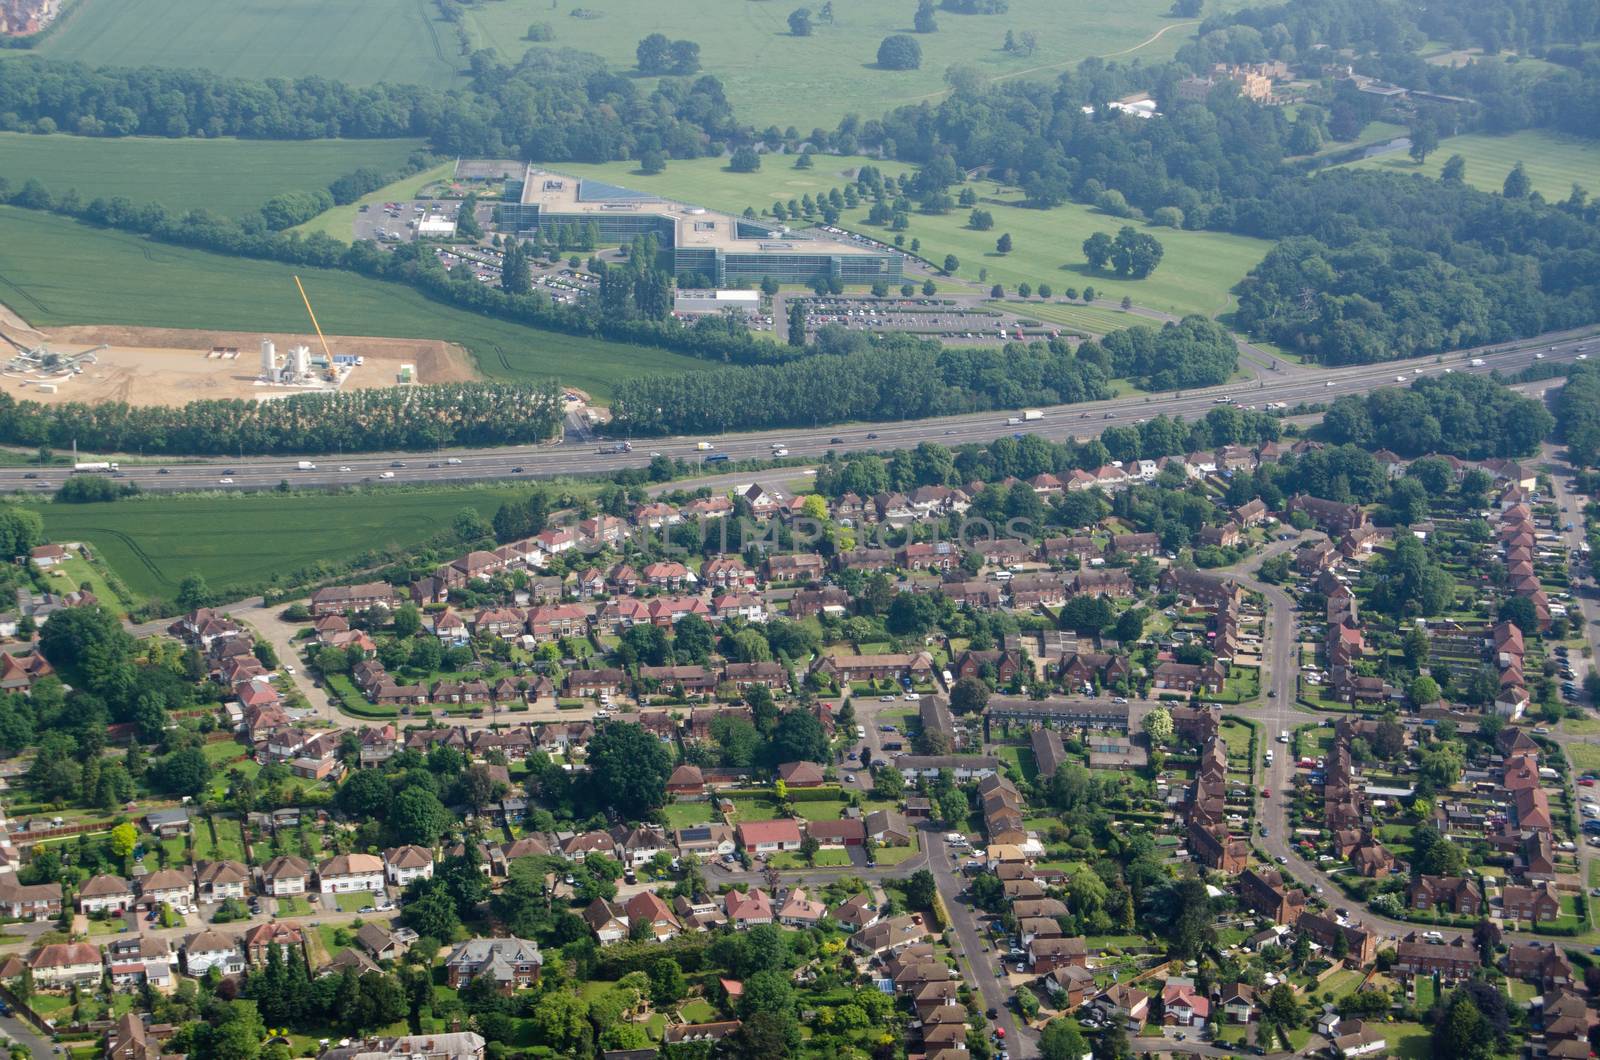 Aerial view across the Berkshire village of Datchet, across the M4 motorway towards Ditton Park and the headquarters of CA Technologies.  Sunny morning, Summer.  